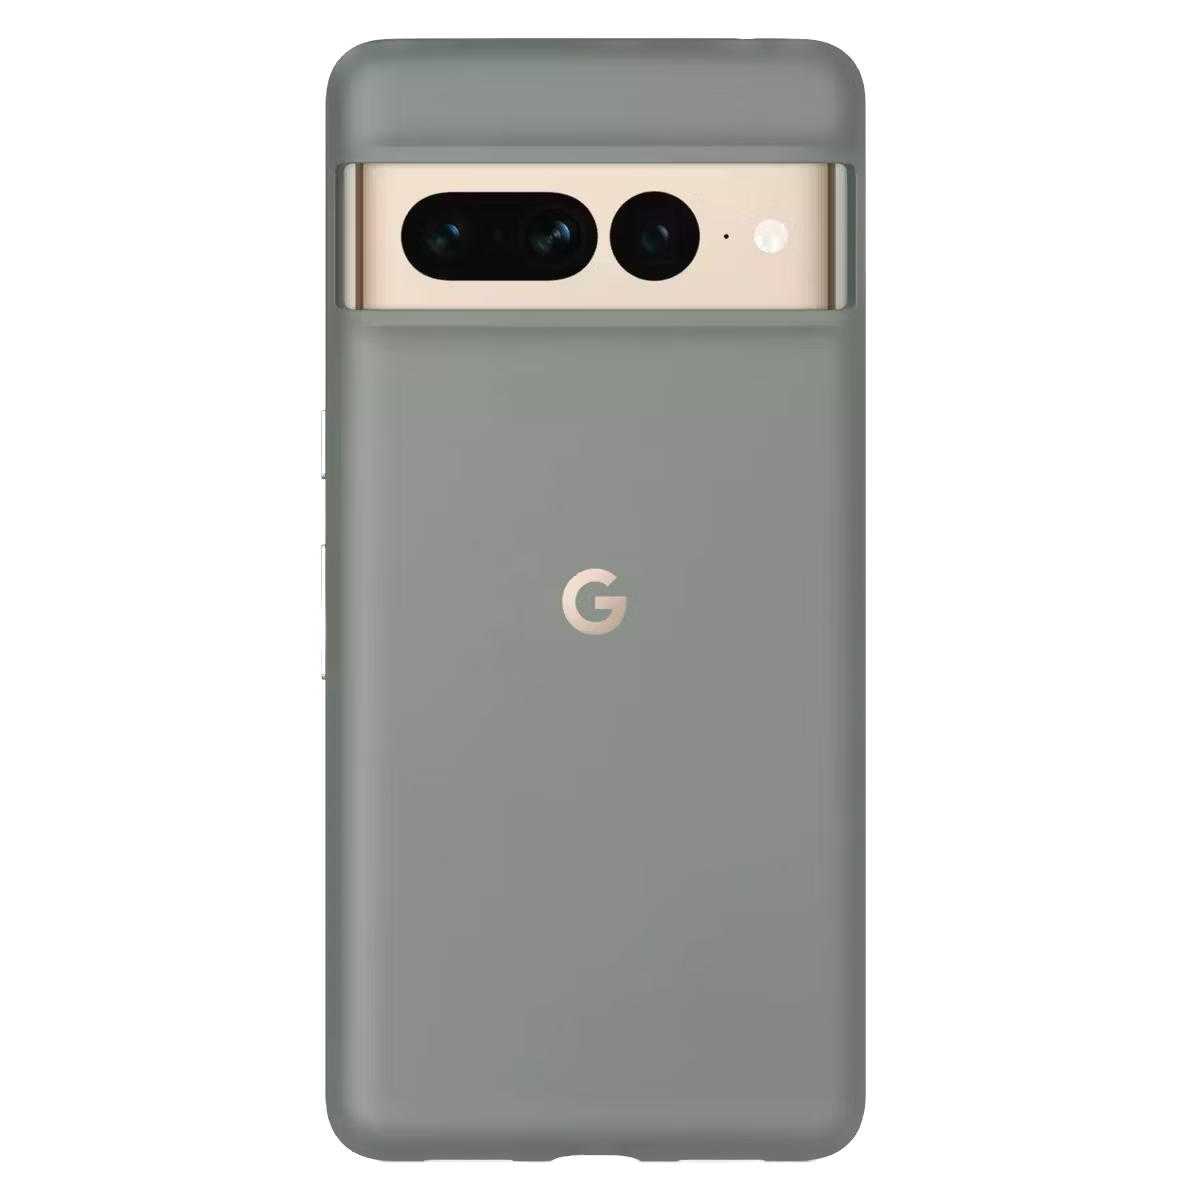 Google-Pixel-7-Pro-renders-on-white-background-qjwefbqwkejf-3 Background Removed